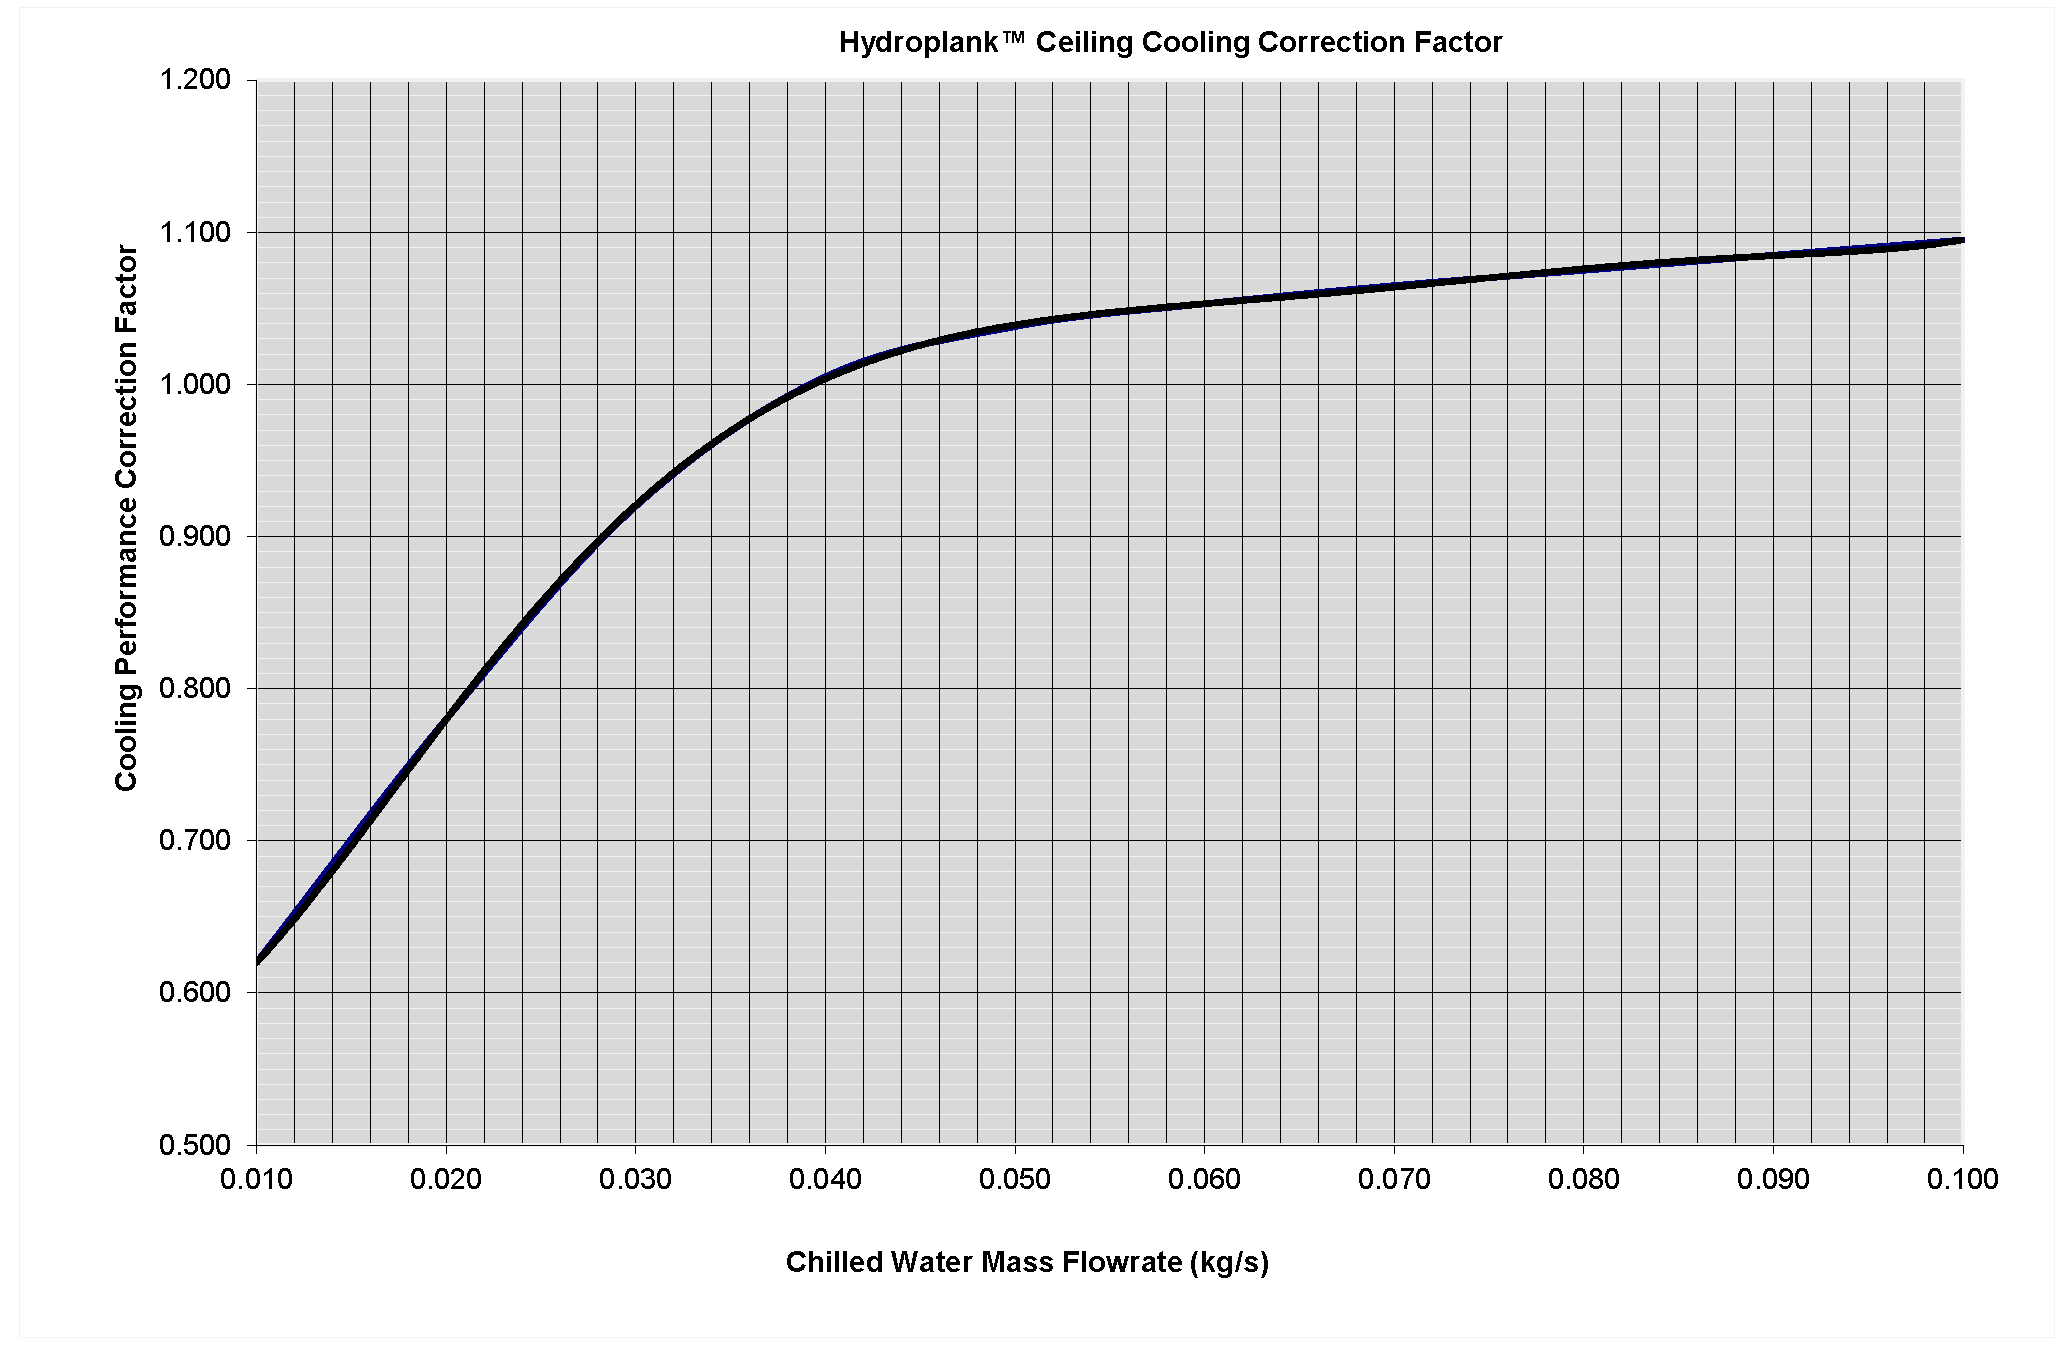 A line chart showing the Hydroplank™ Ceiling cooling correction factor